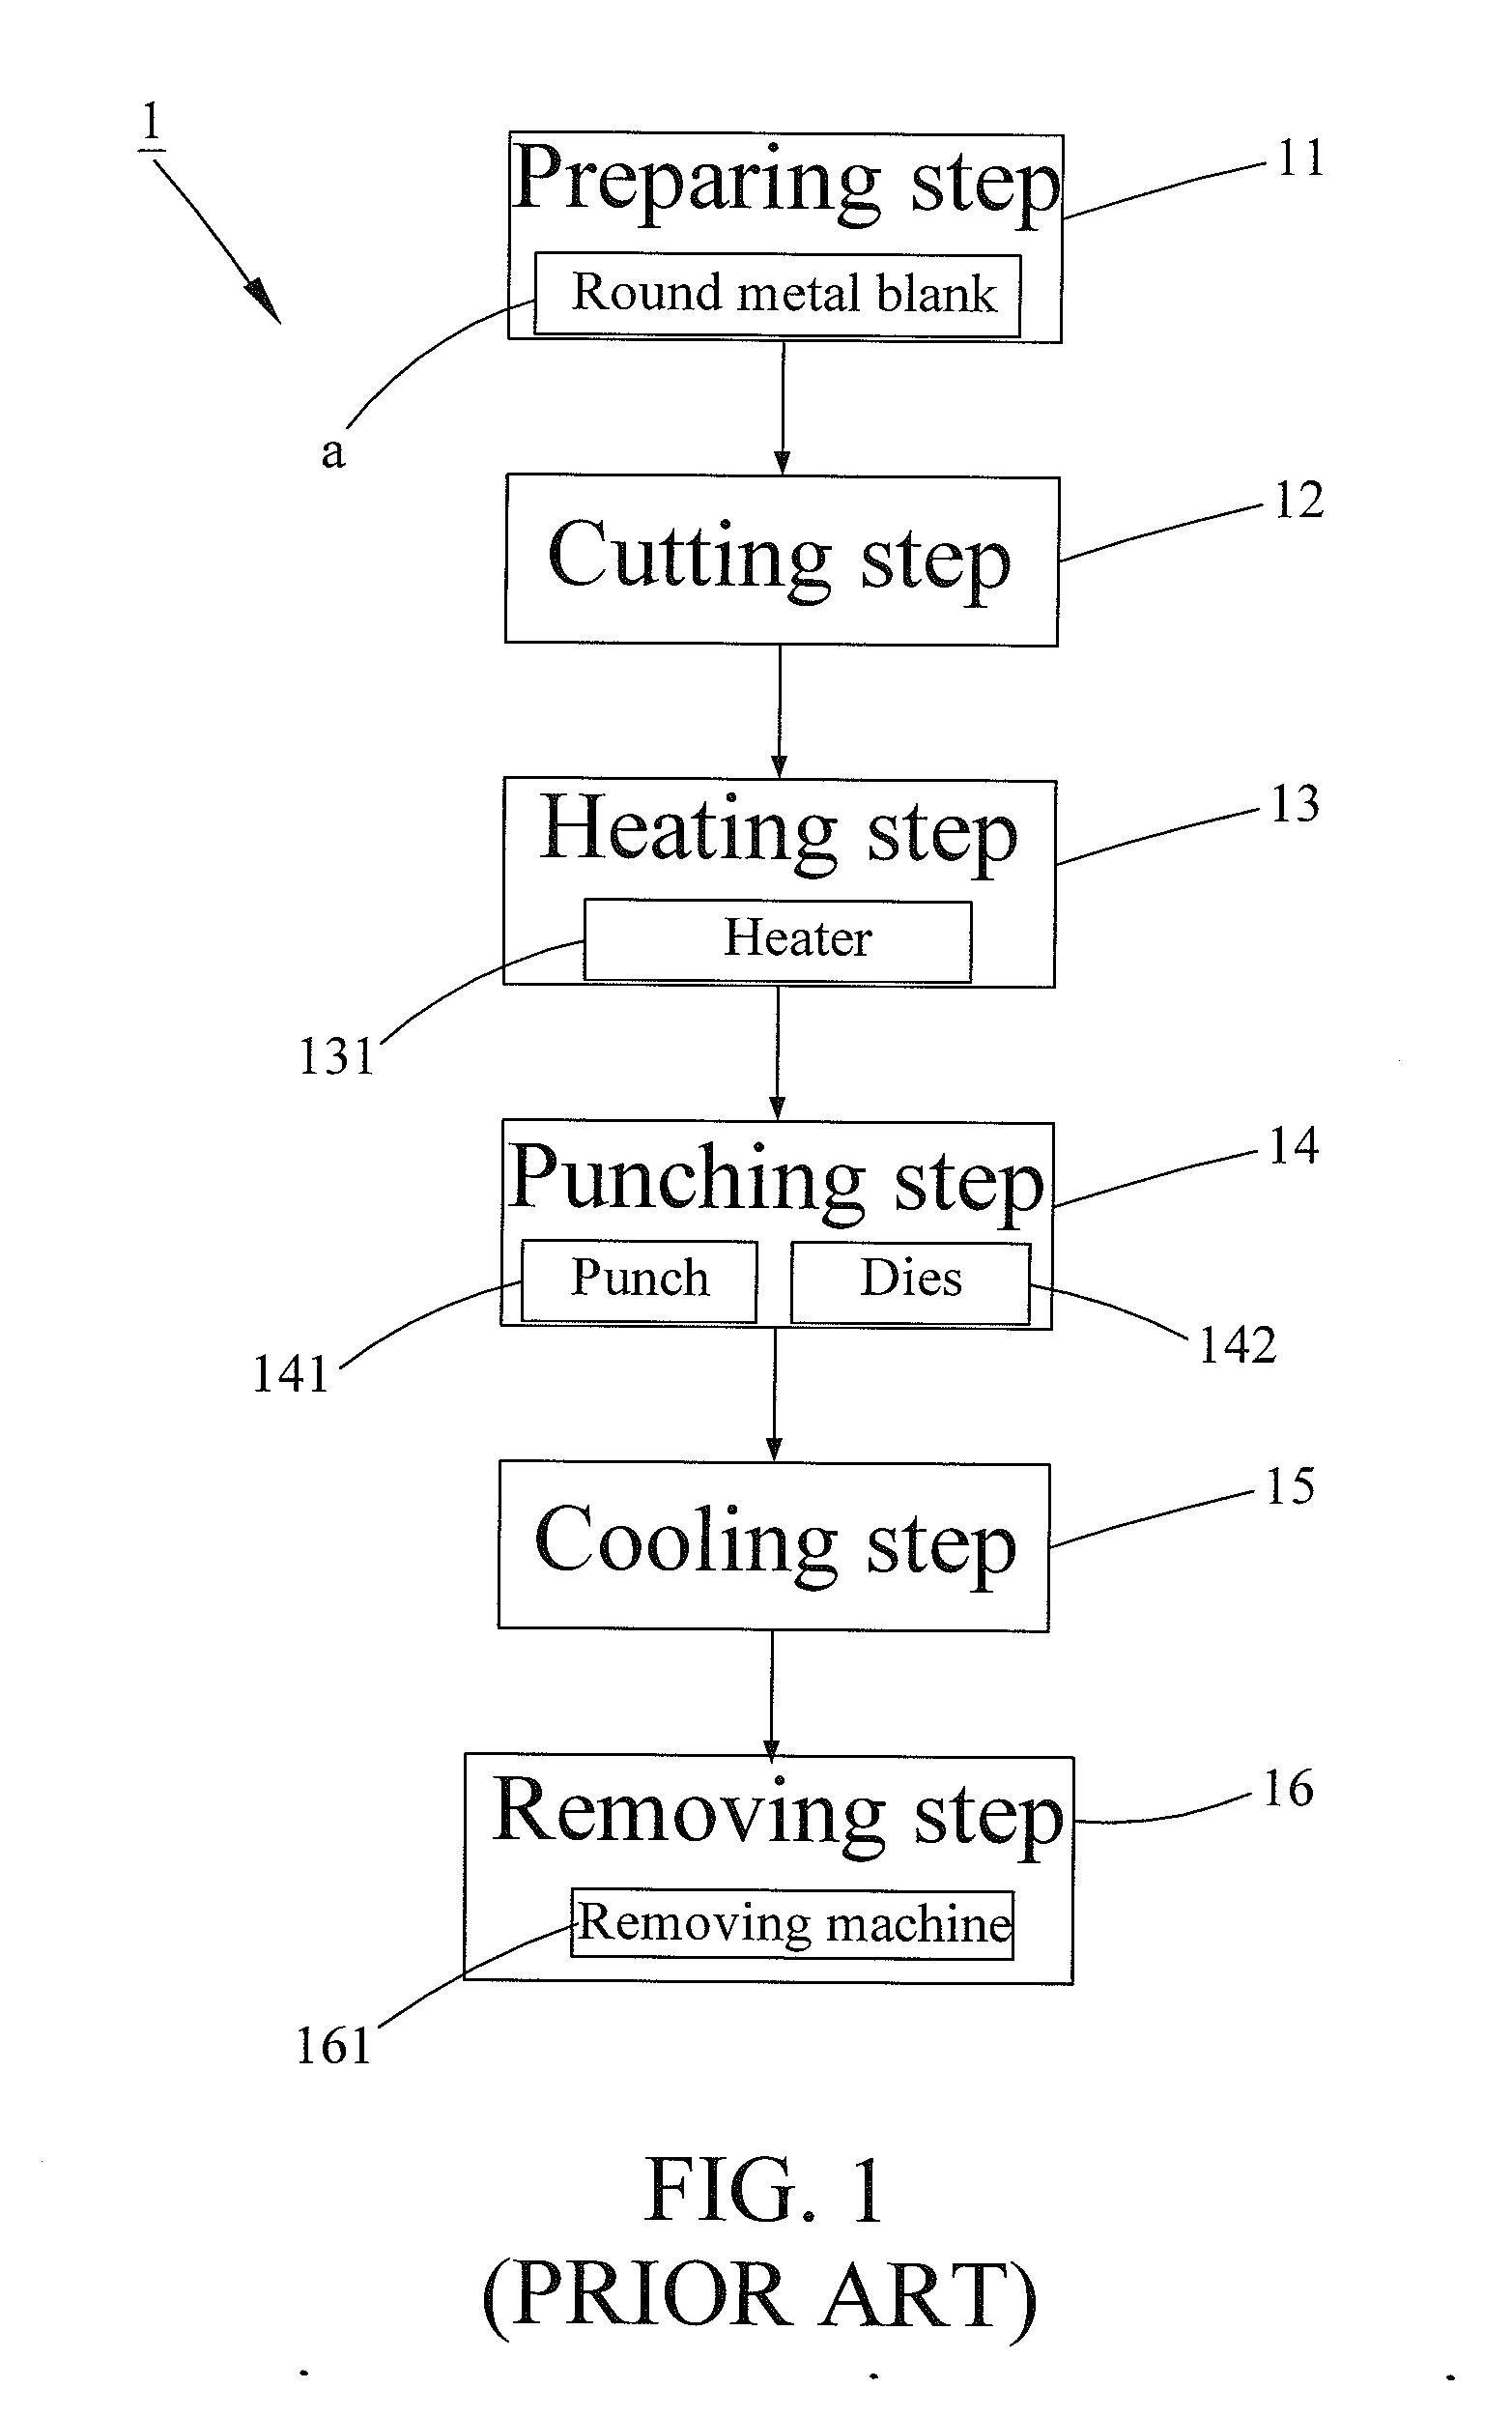 Method of Making a Spanner